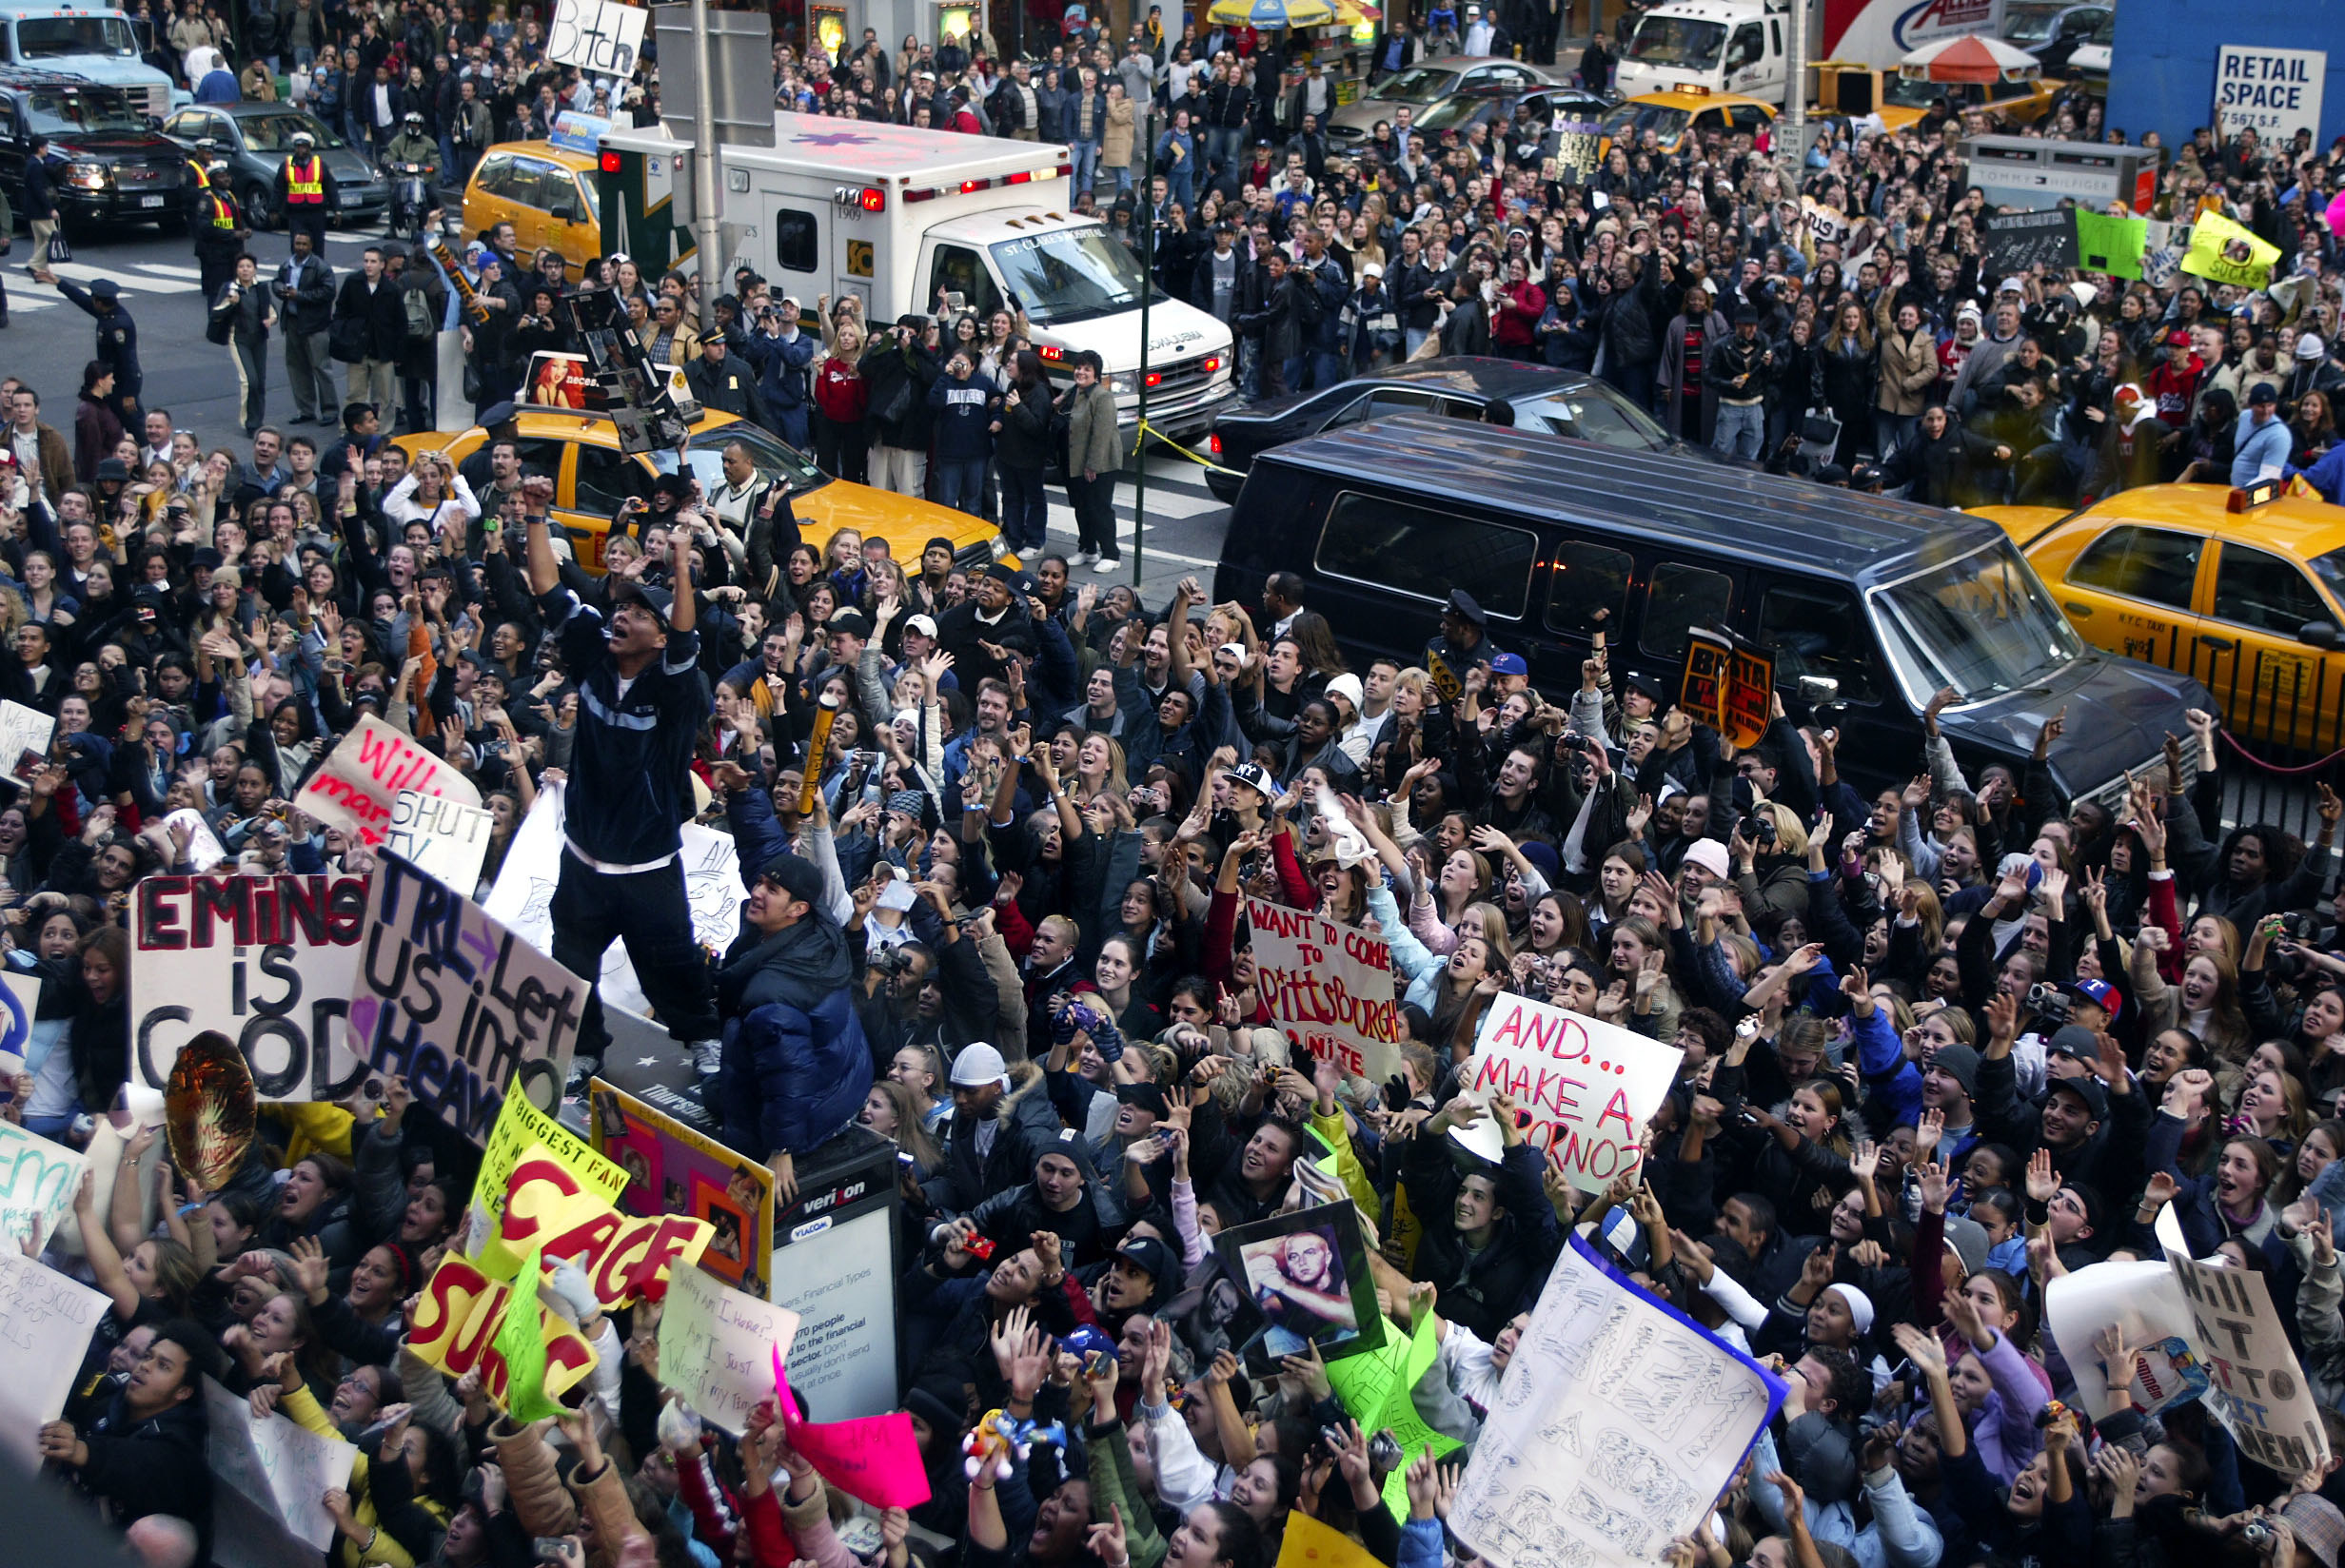 Crowds clog the streets bringing traffic to a halt in Times Square with hopes of getting a glimpse of Eminem during his appearence on TRL at the MTV studios in New York City